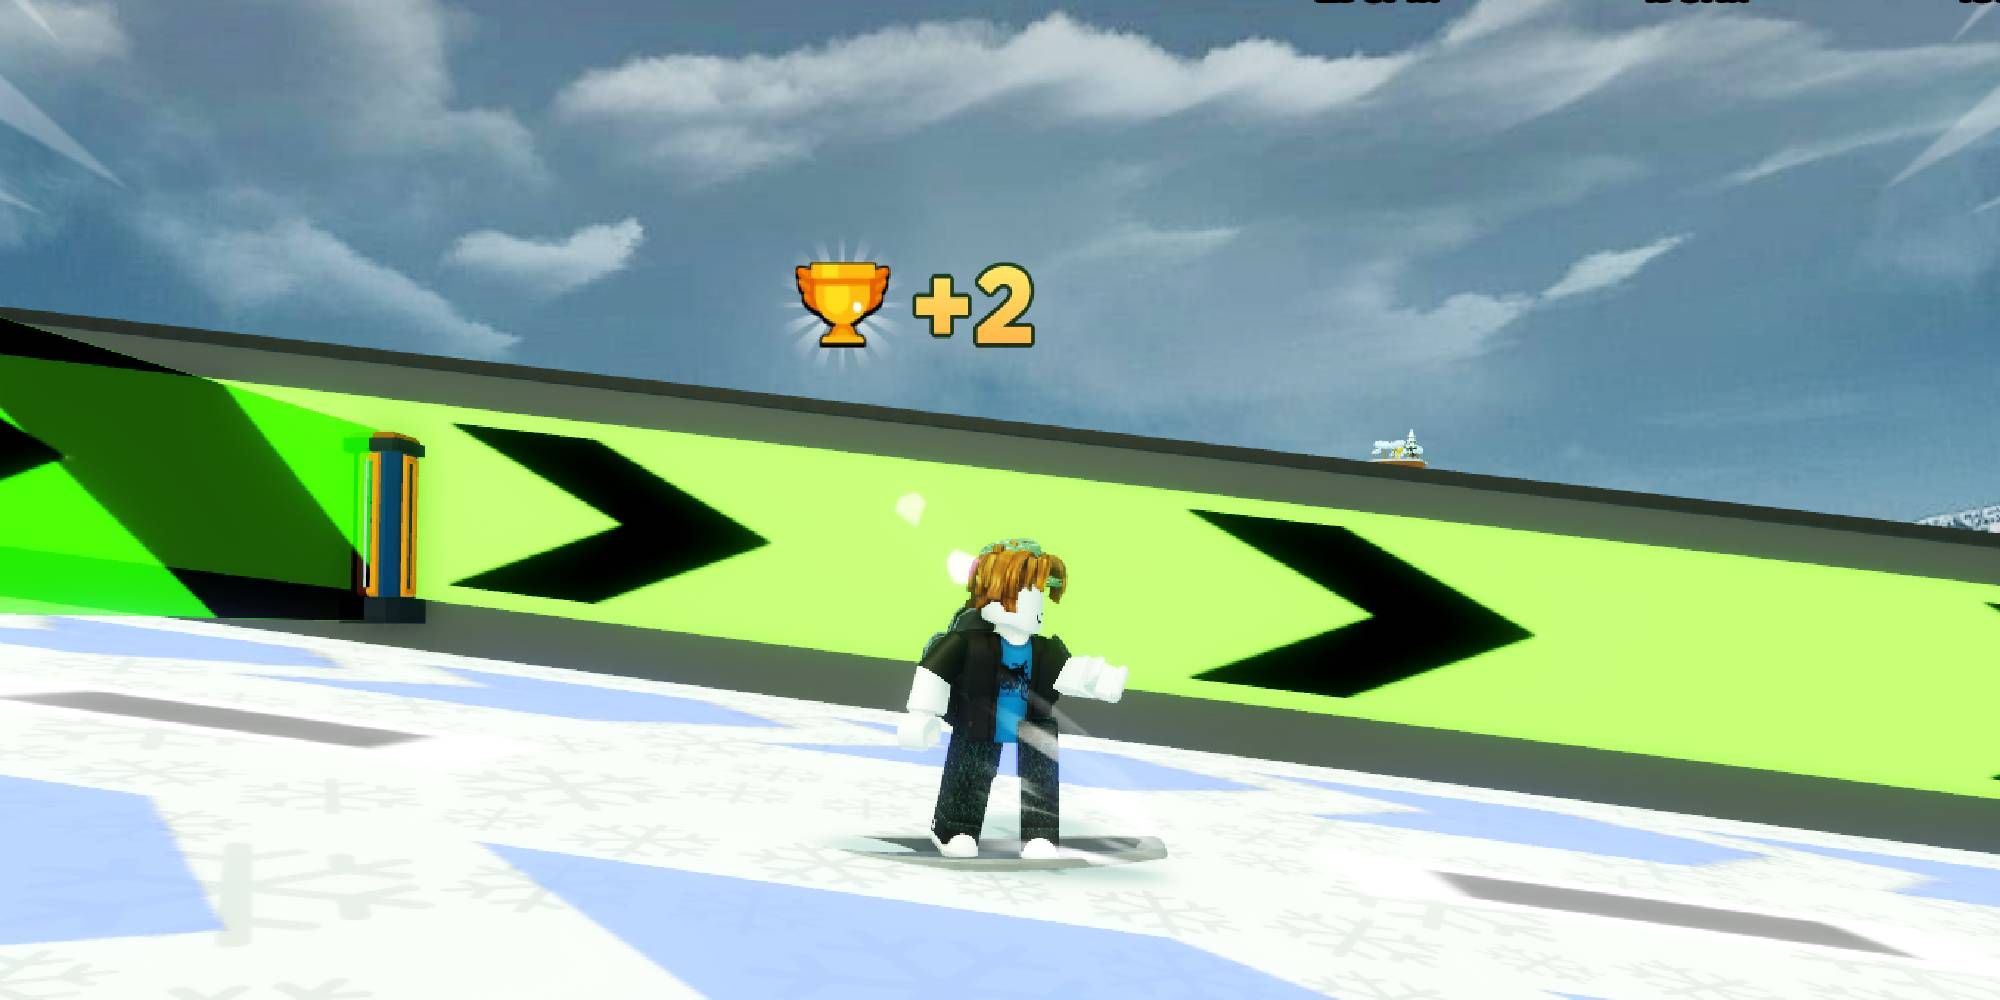 Roblox Fly Race codes (February 2023): Trophies, skins, and more